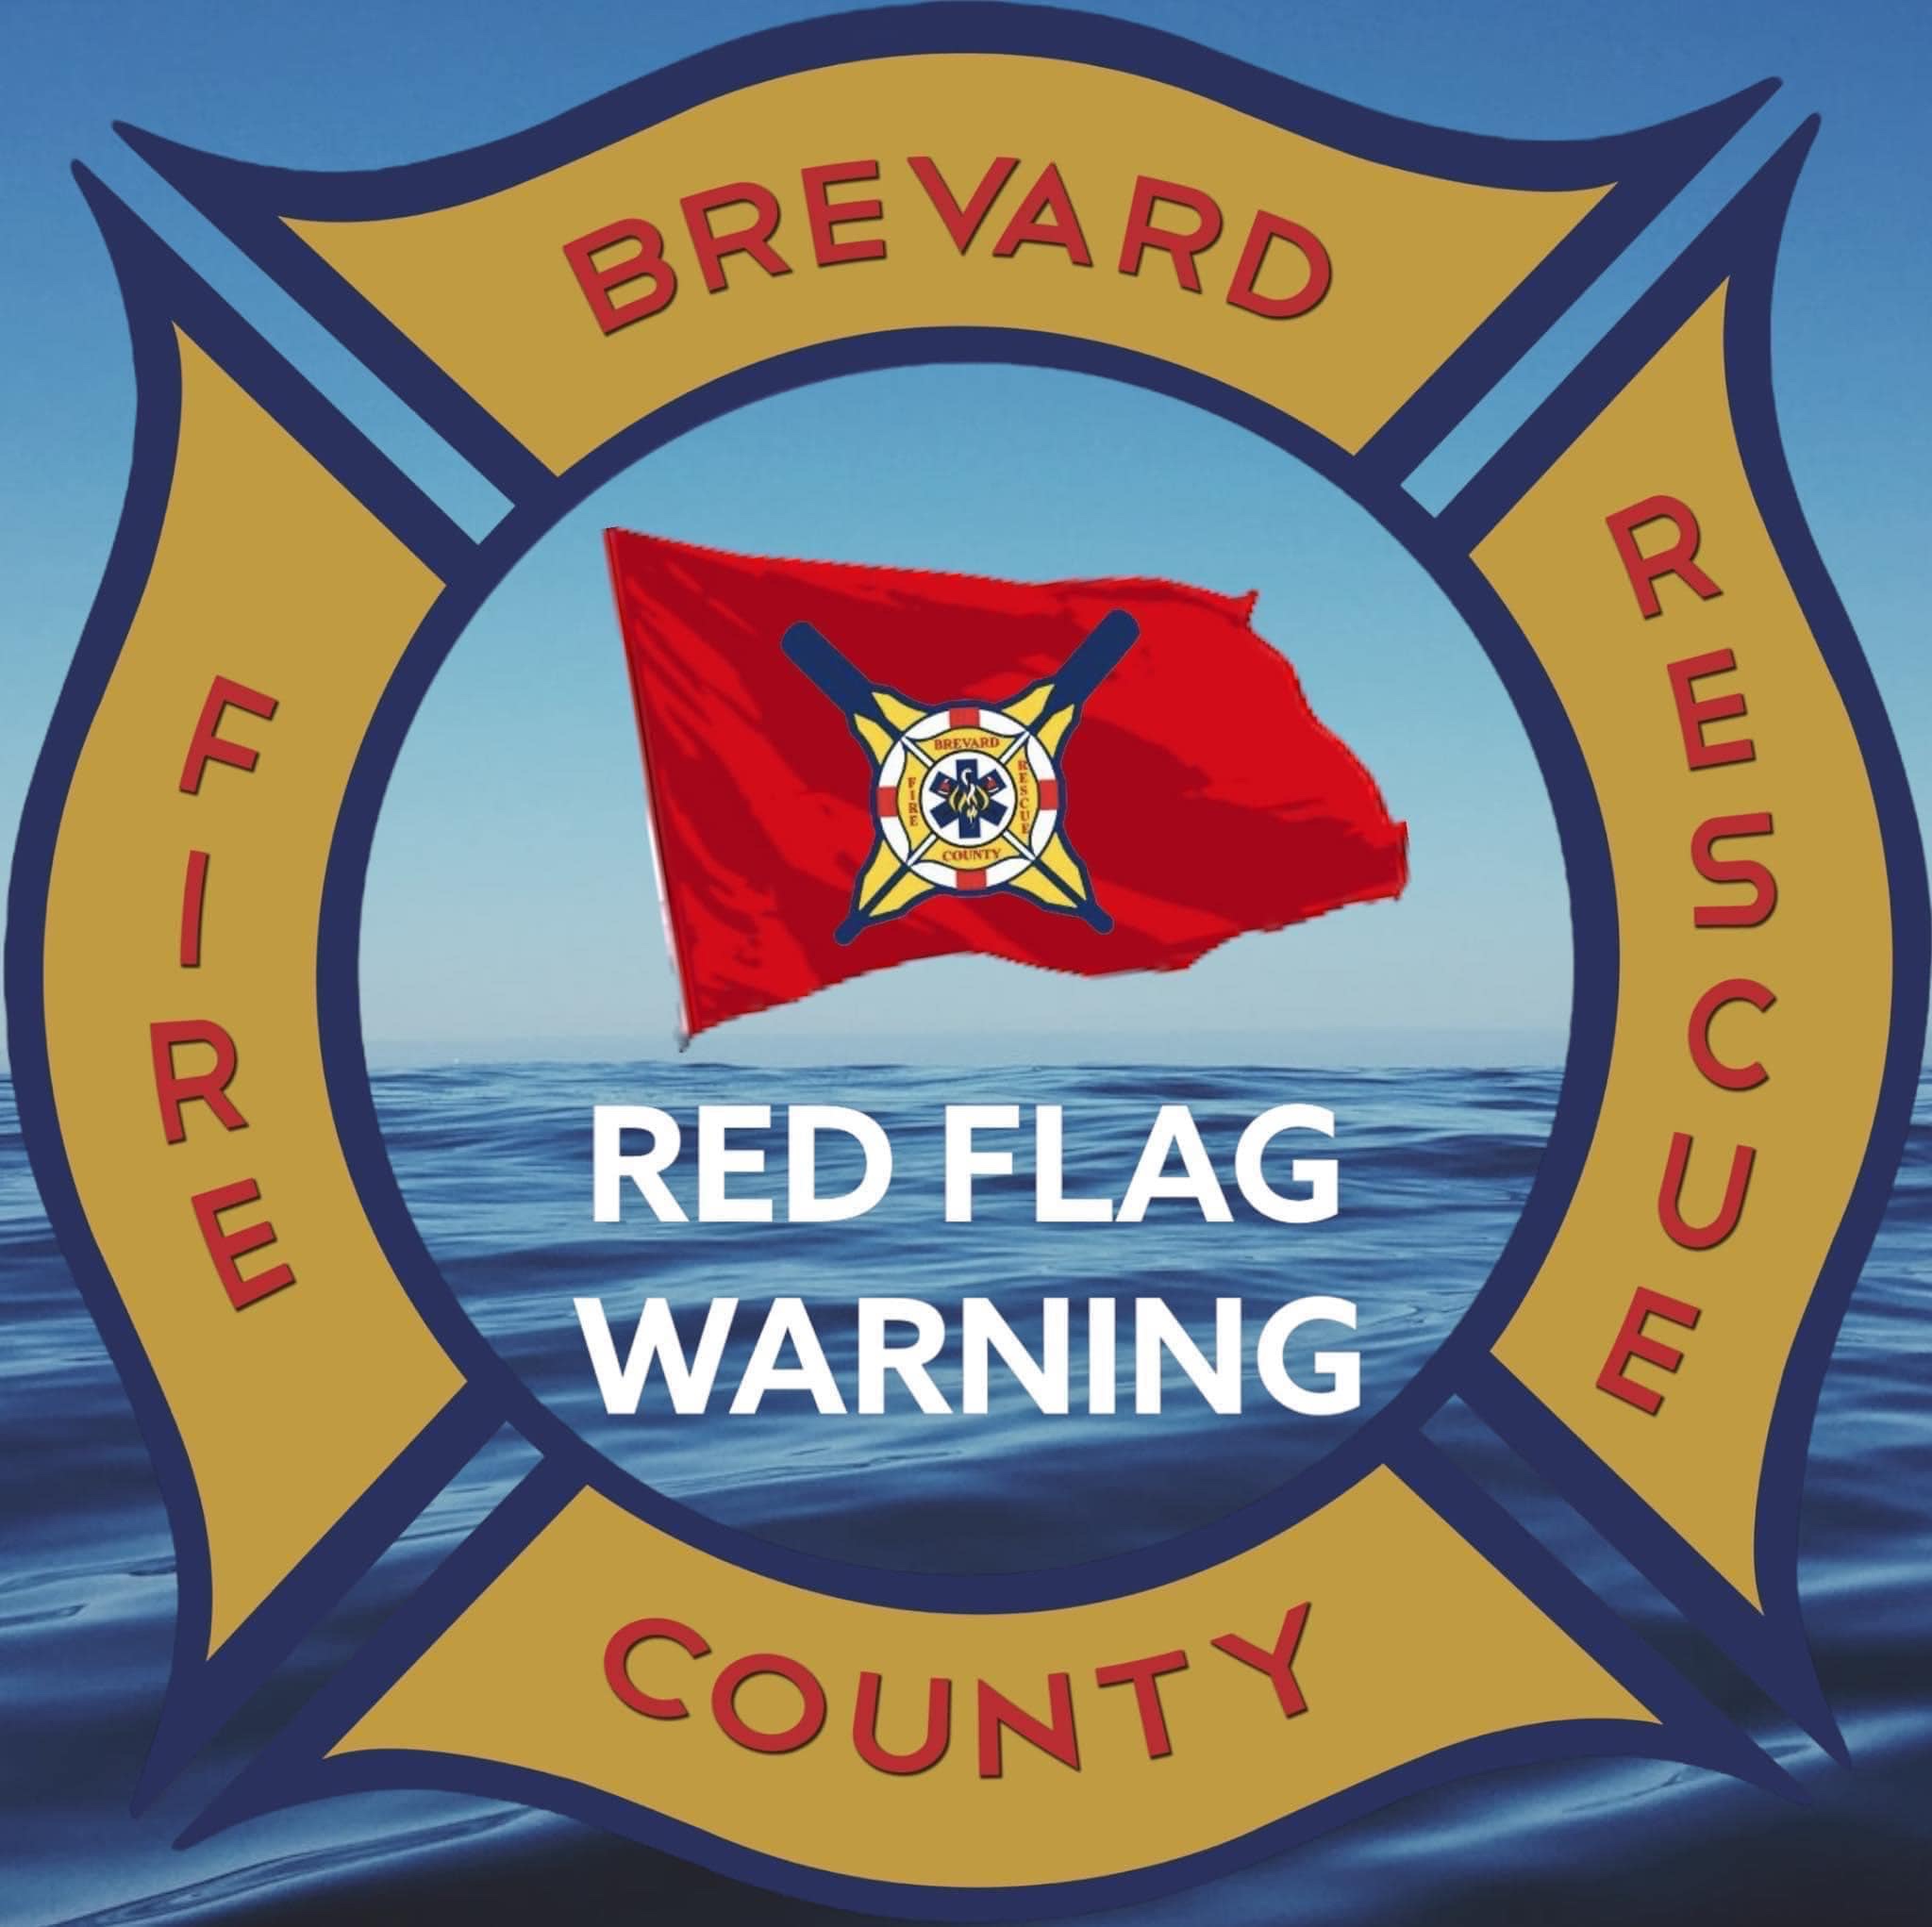 Brevard County’s Beaches Fly Red Flags as Memorial Day Approaches